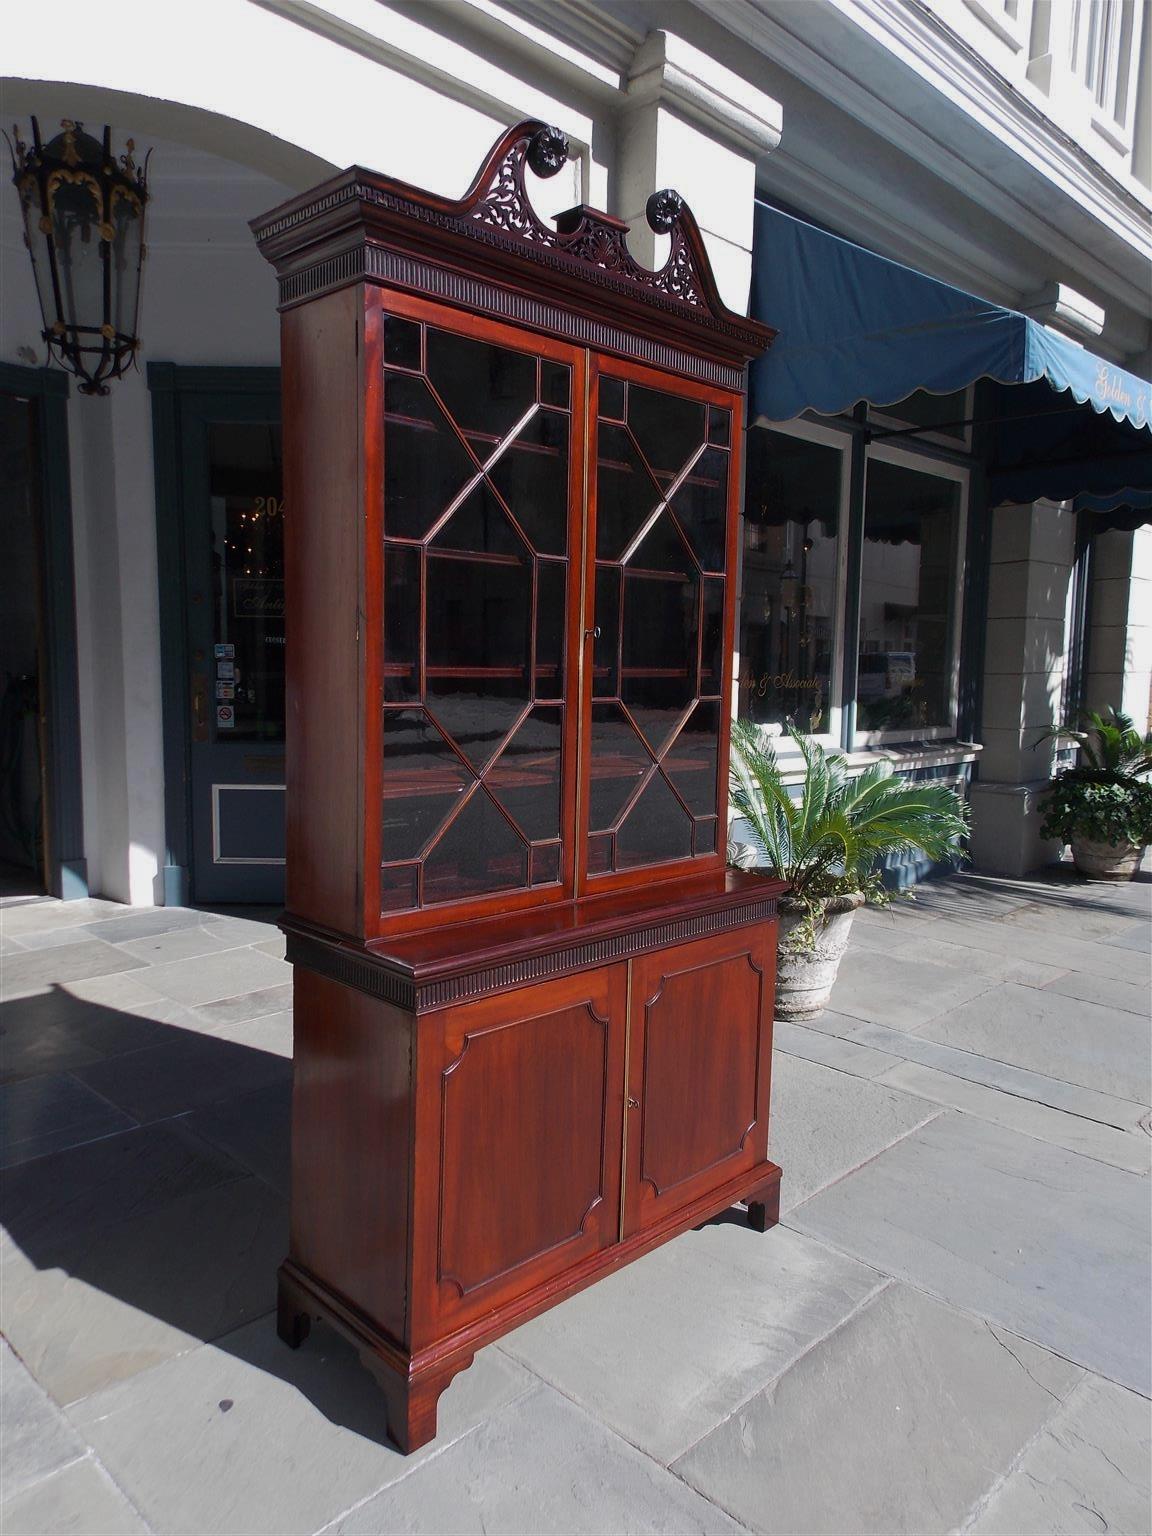 English Chippendale mahogany bookcase with a broken arched pediment, centered floral medallions, intricately carved fret work, dental molding, fluted gouge work, upper case with two hinged glass doors revealing four adjustable interior shelves,